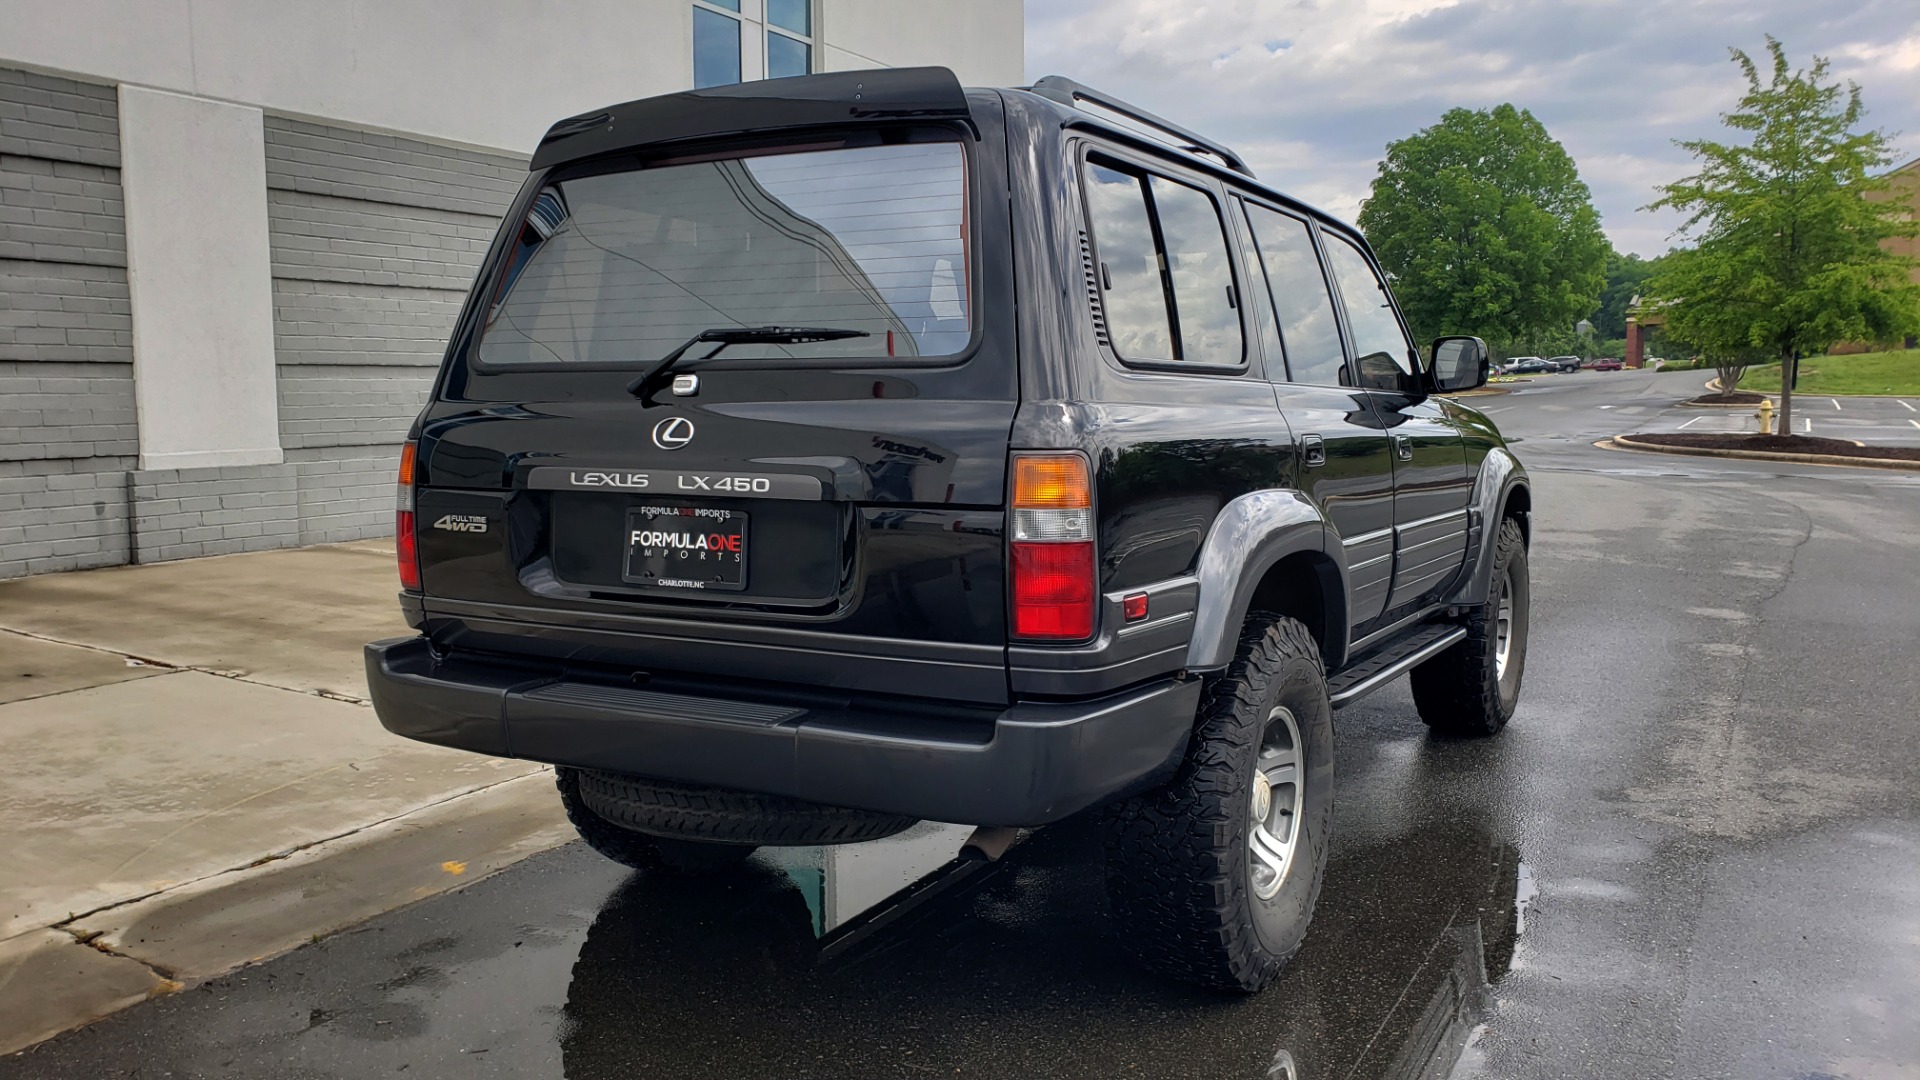 Used 1996 Lexus LX 450 for sale Sold at Formula Imports in Charlotte NC 28227 9